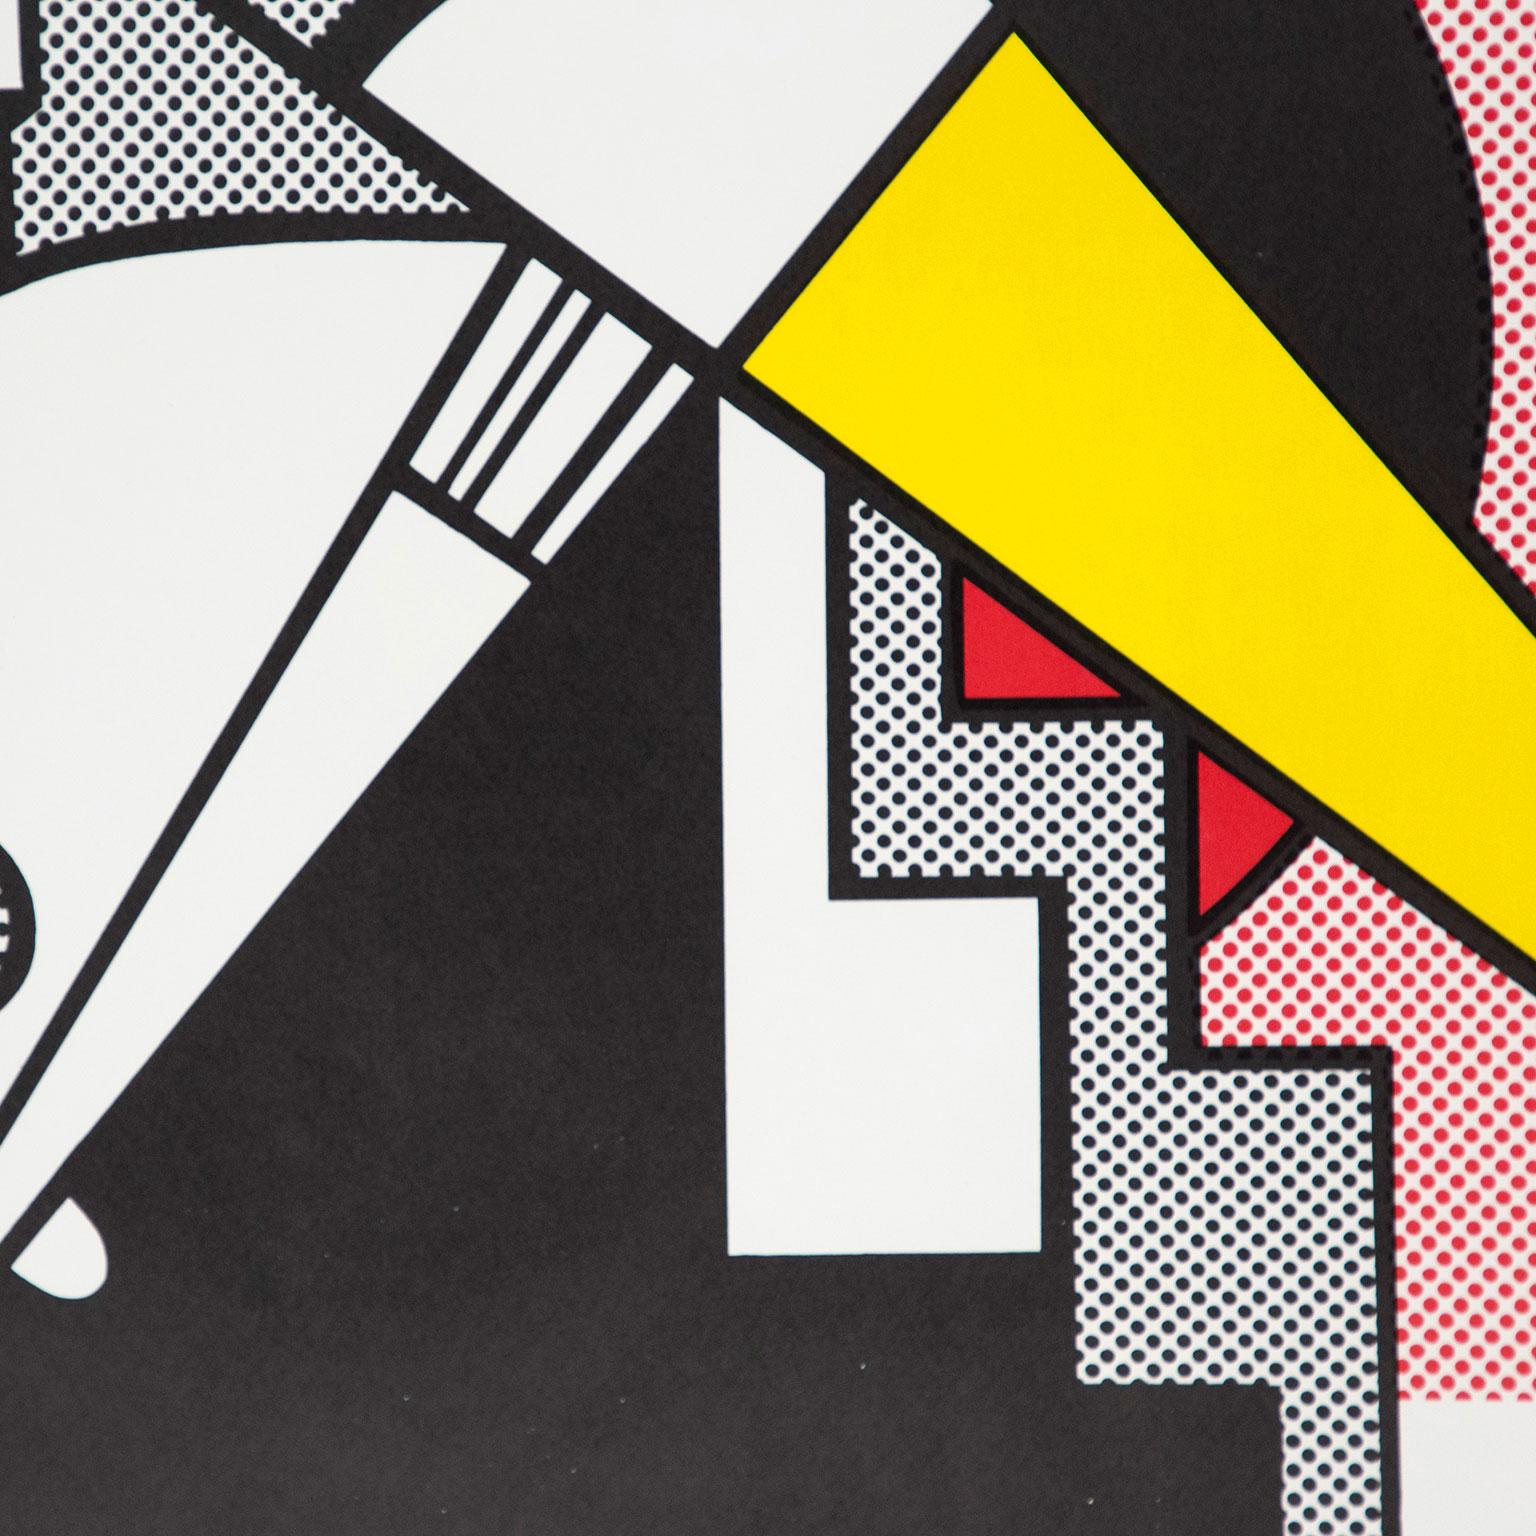 Roy Lichtenstein (1923-1997) was one of the most successful and influential artists of the 20th century, helping pioneer and define Pop Art in the 1960s.

Lichtenstein's signature style mined images from comic books and advertisements, elevating